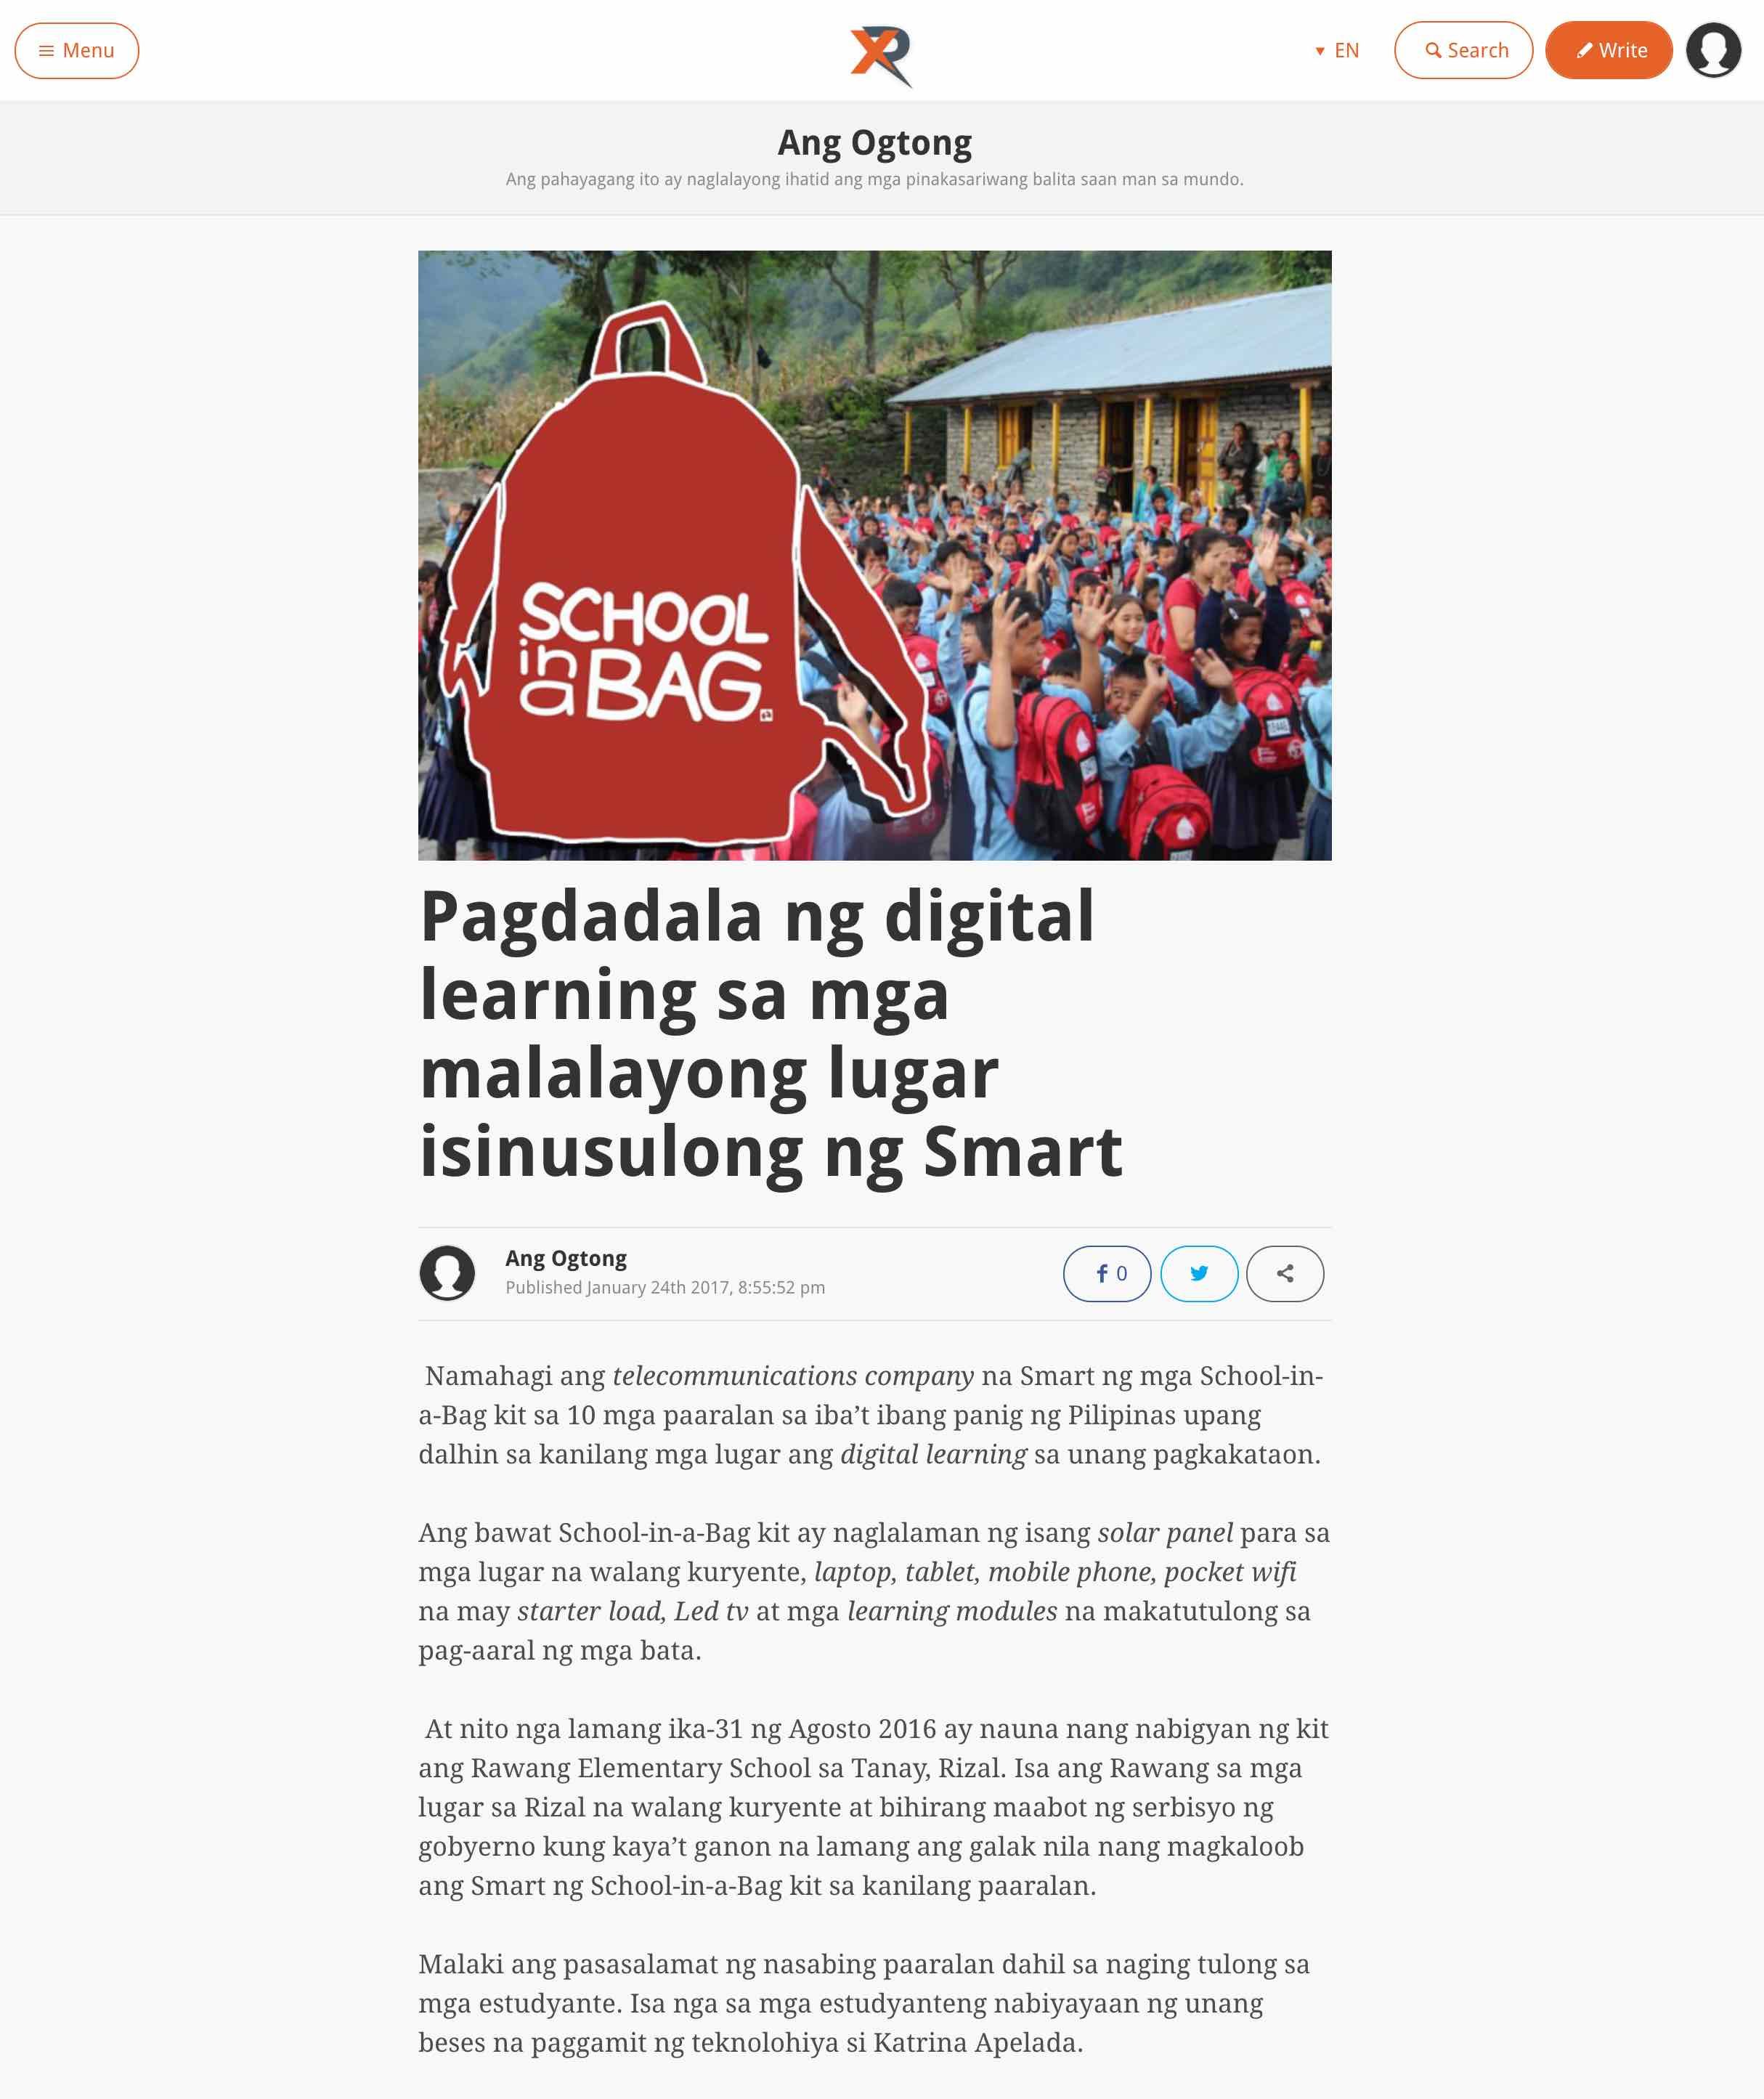 PRESS FREEDOM. The Rappler X page of "Ang Ogtong" written, edited, and published by high school students from Region 6. Click on the photo to go to the page.  